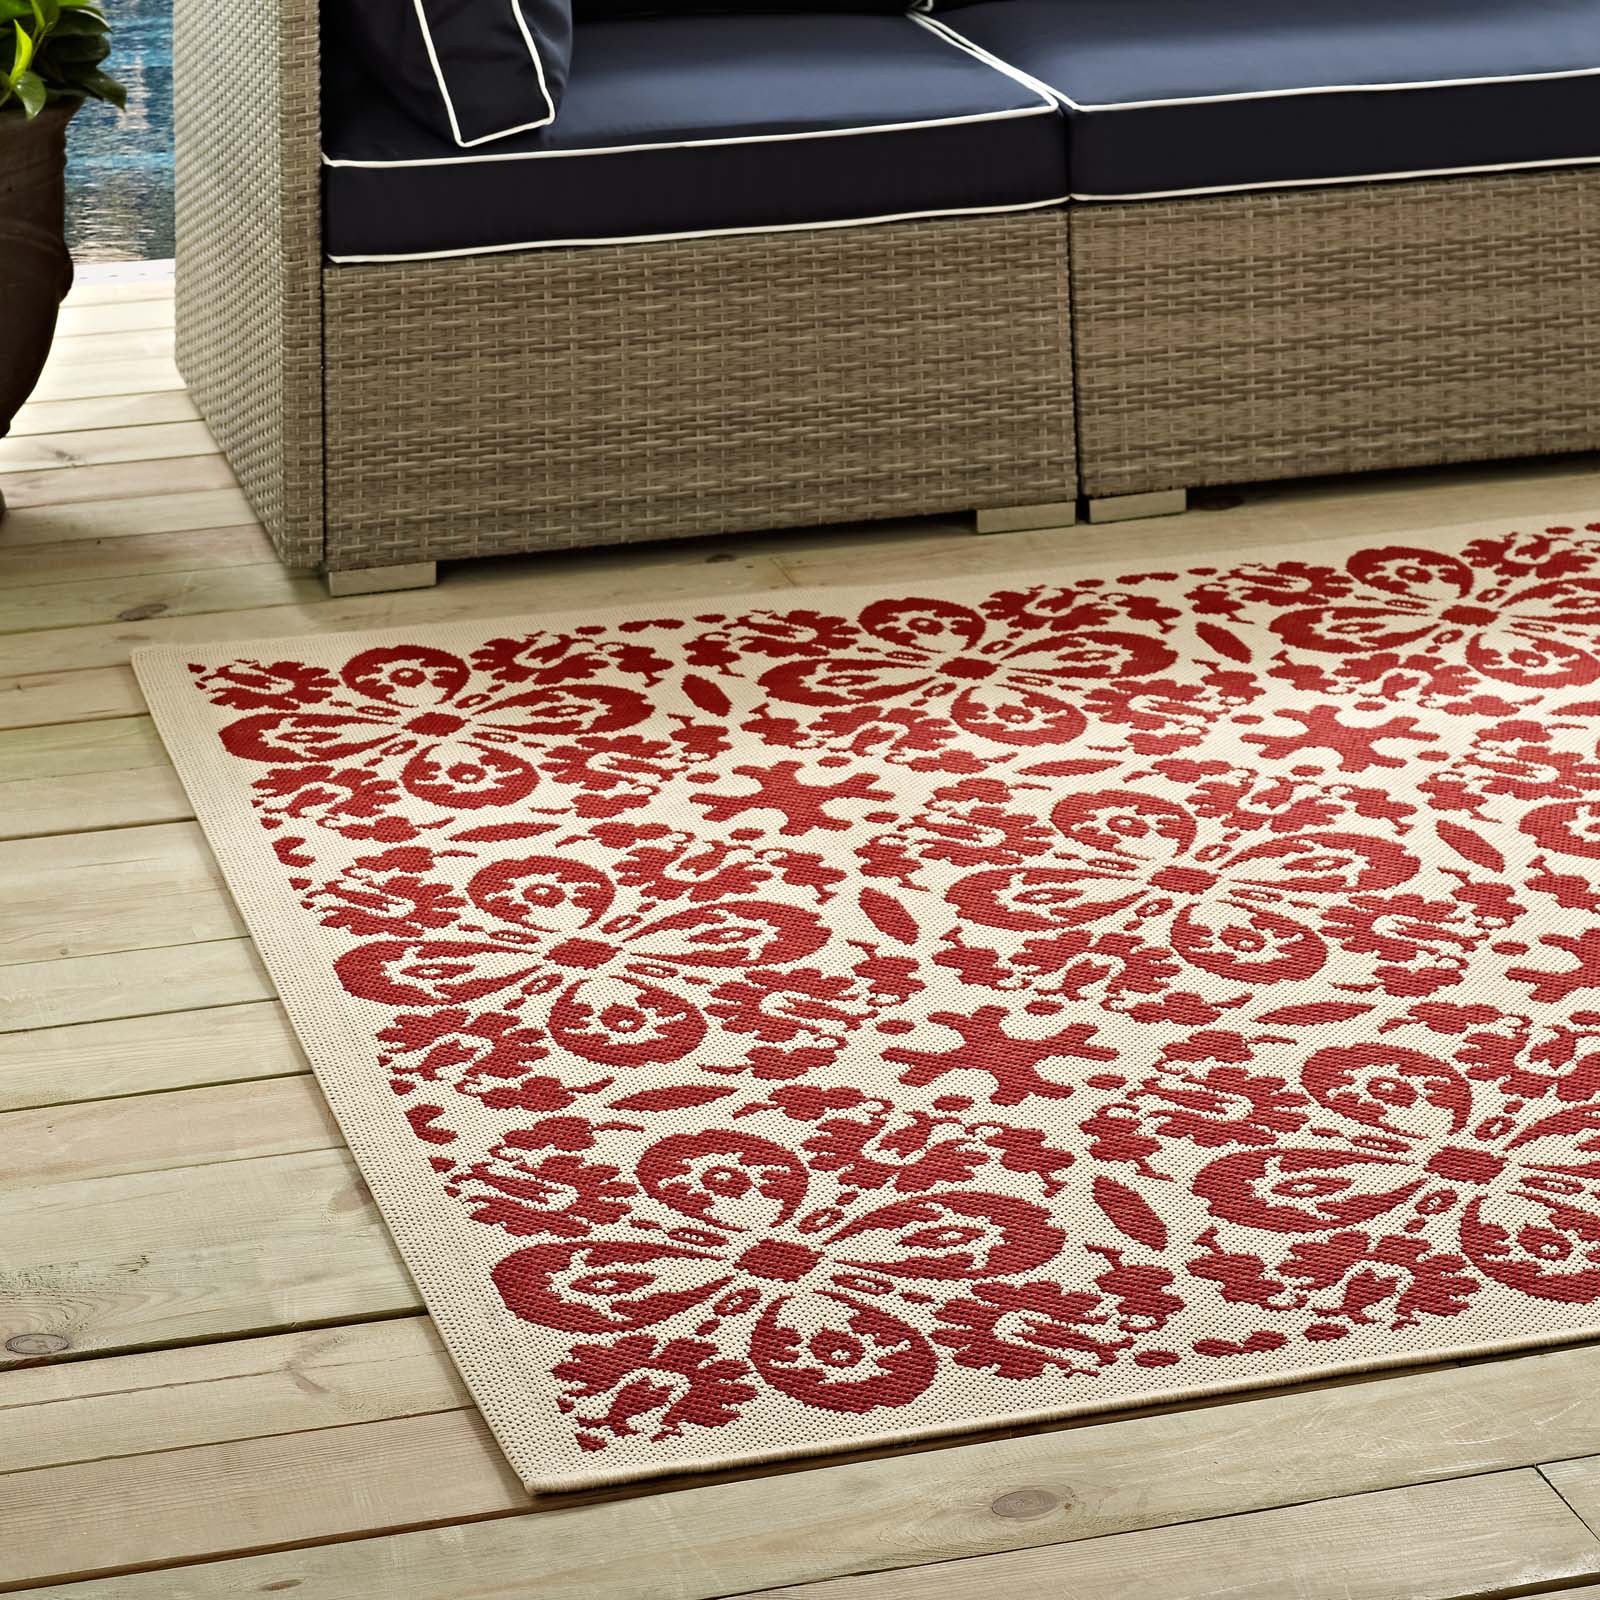 Ariana Vintage Floral Trellis 4x6 Indoor and Outdoor Area Rug-Indoor and Outdoor Area Rug-Modway-Wall2Wall Furnishings